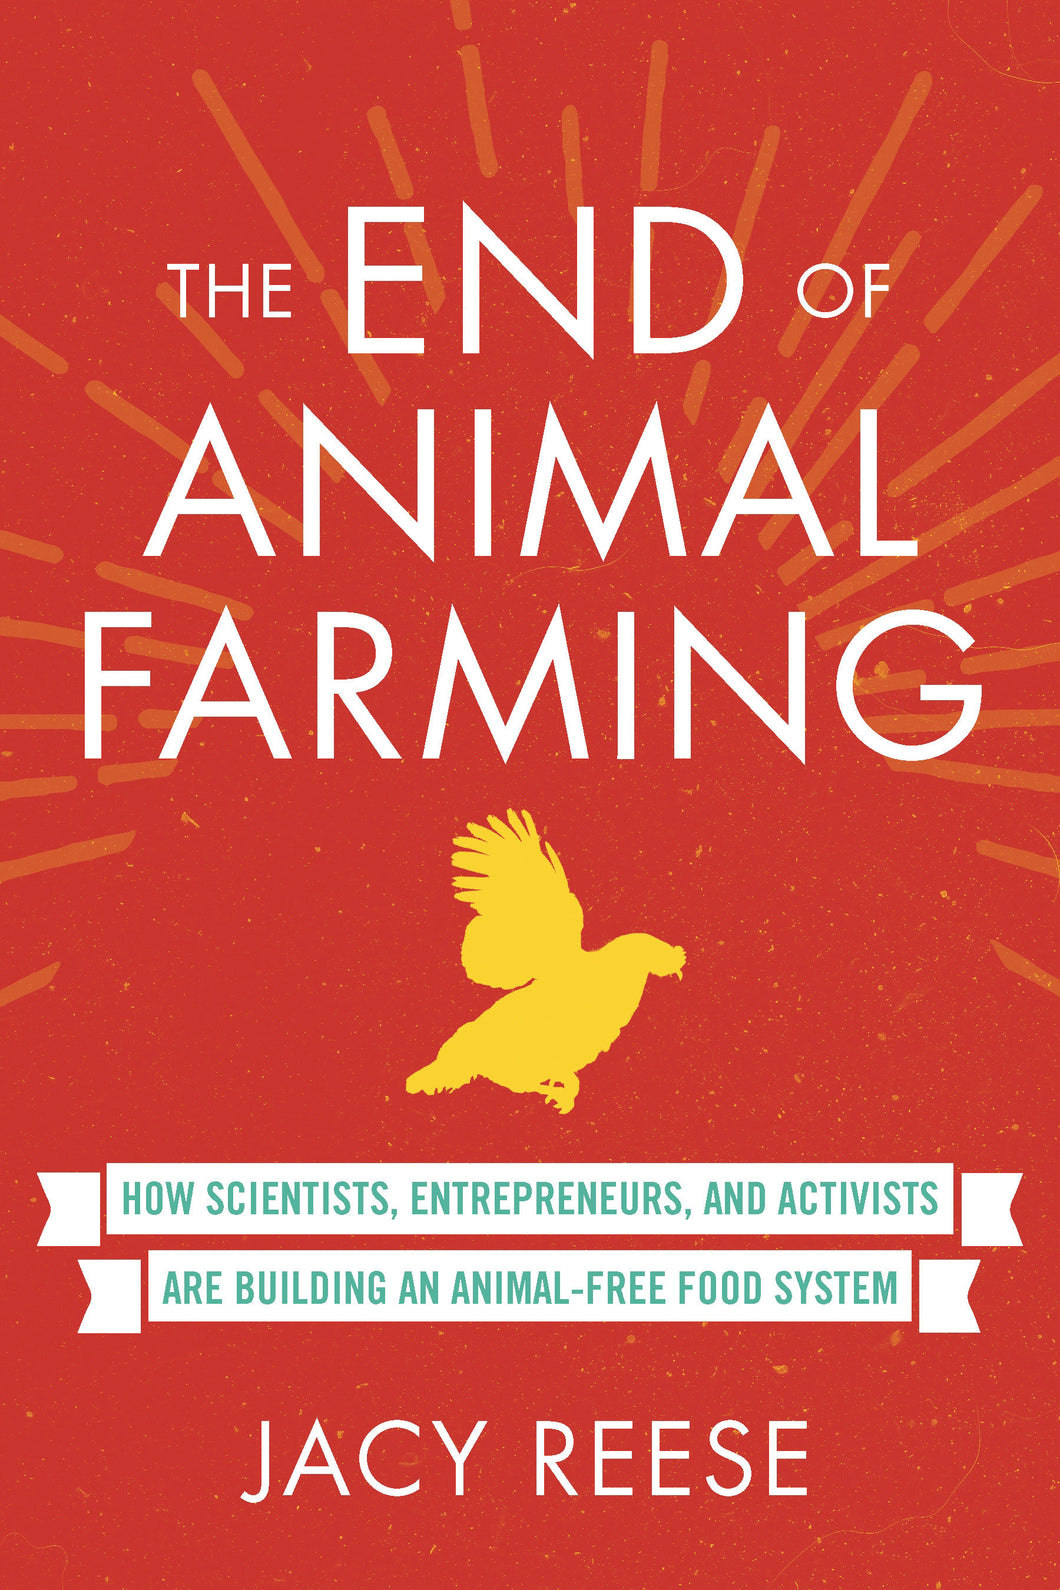 The End of Animal Farming: How Scientists, Entrepreneurs, and Activists Are Building an Animal-Free Food System